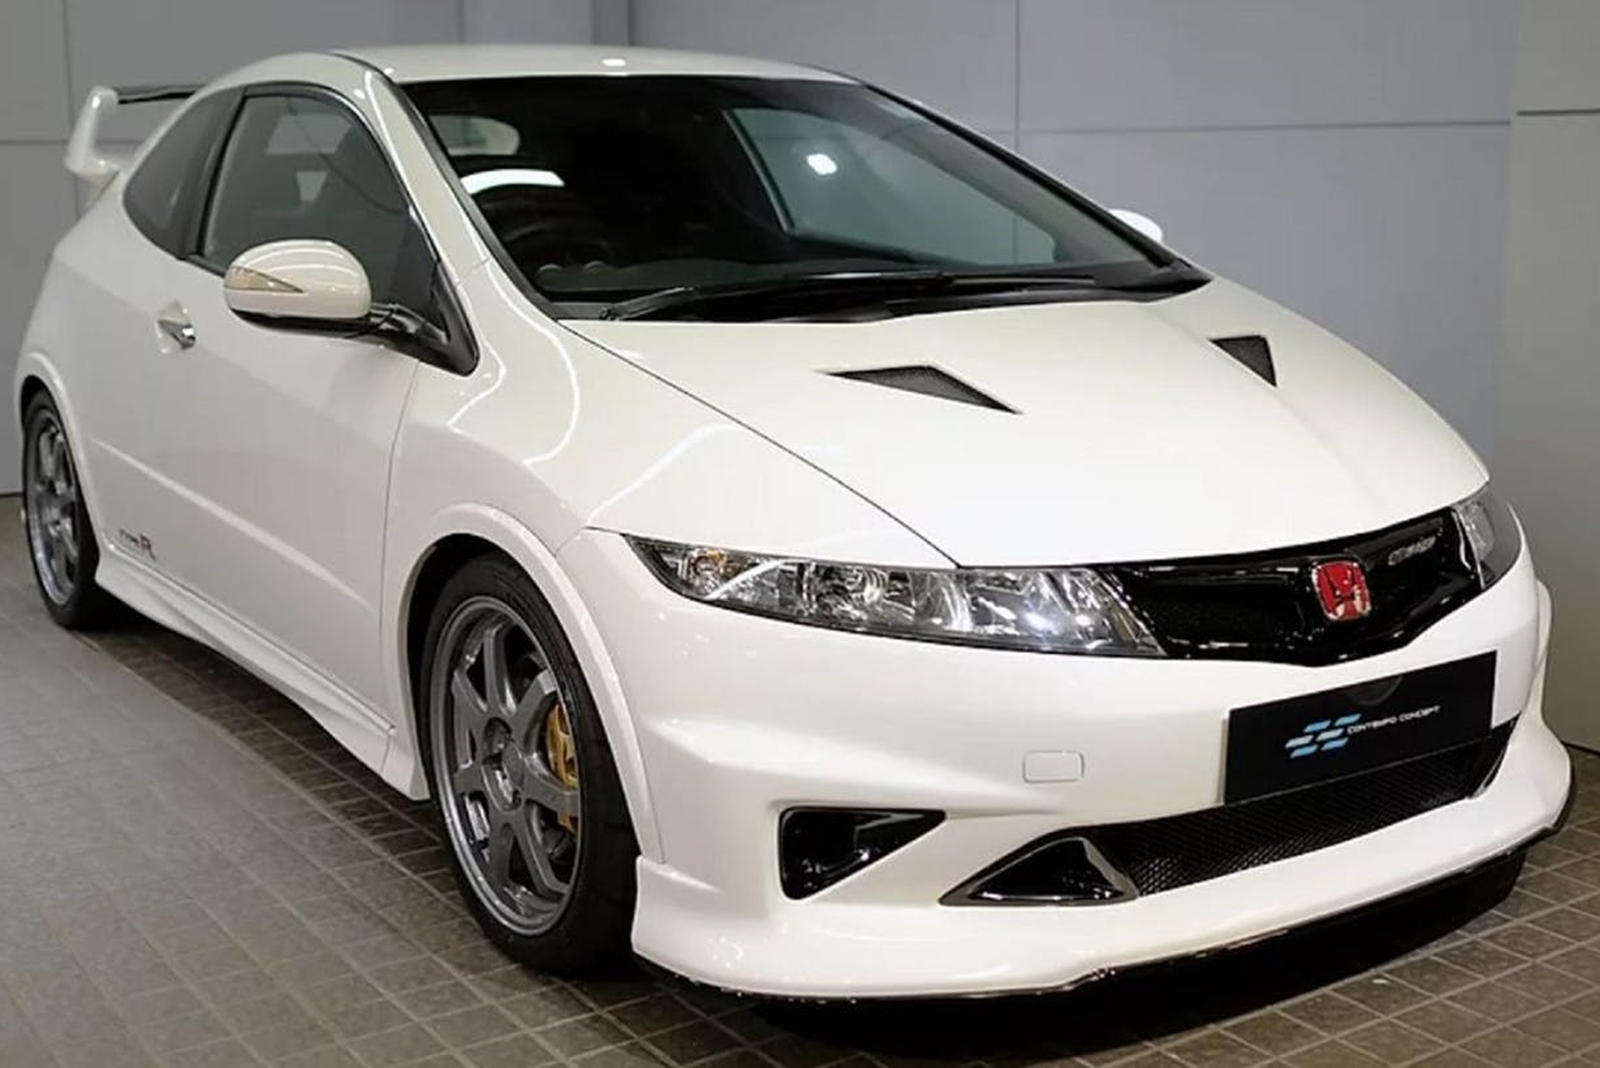 Honda Unveils $90,000 Civic Type R You Can Race